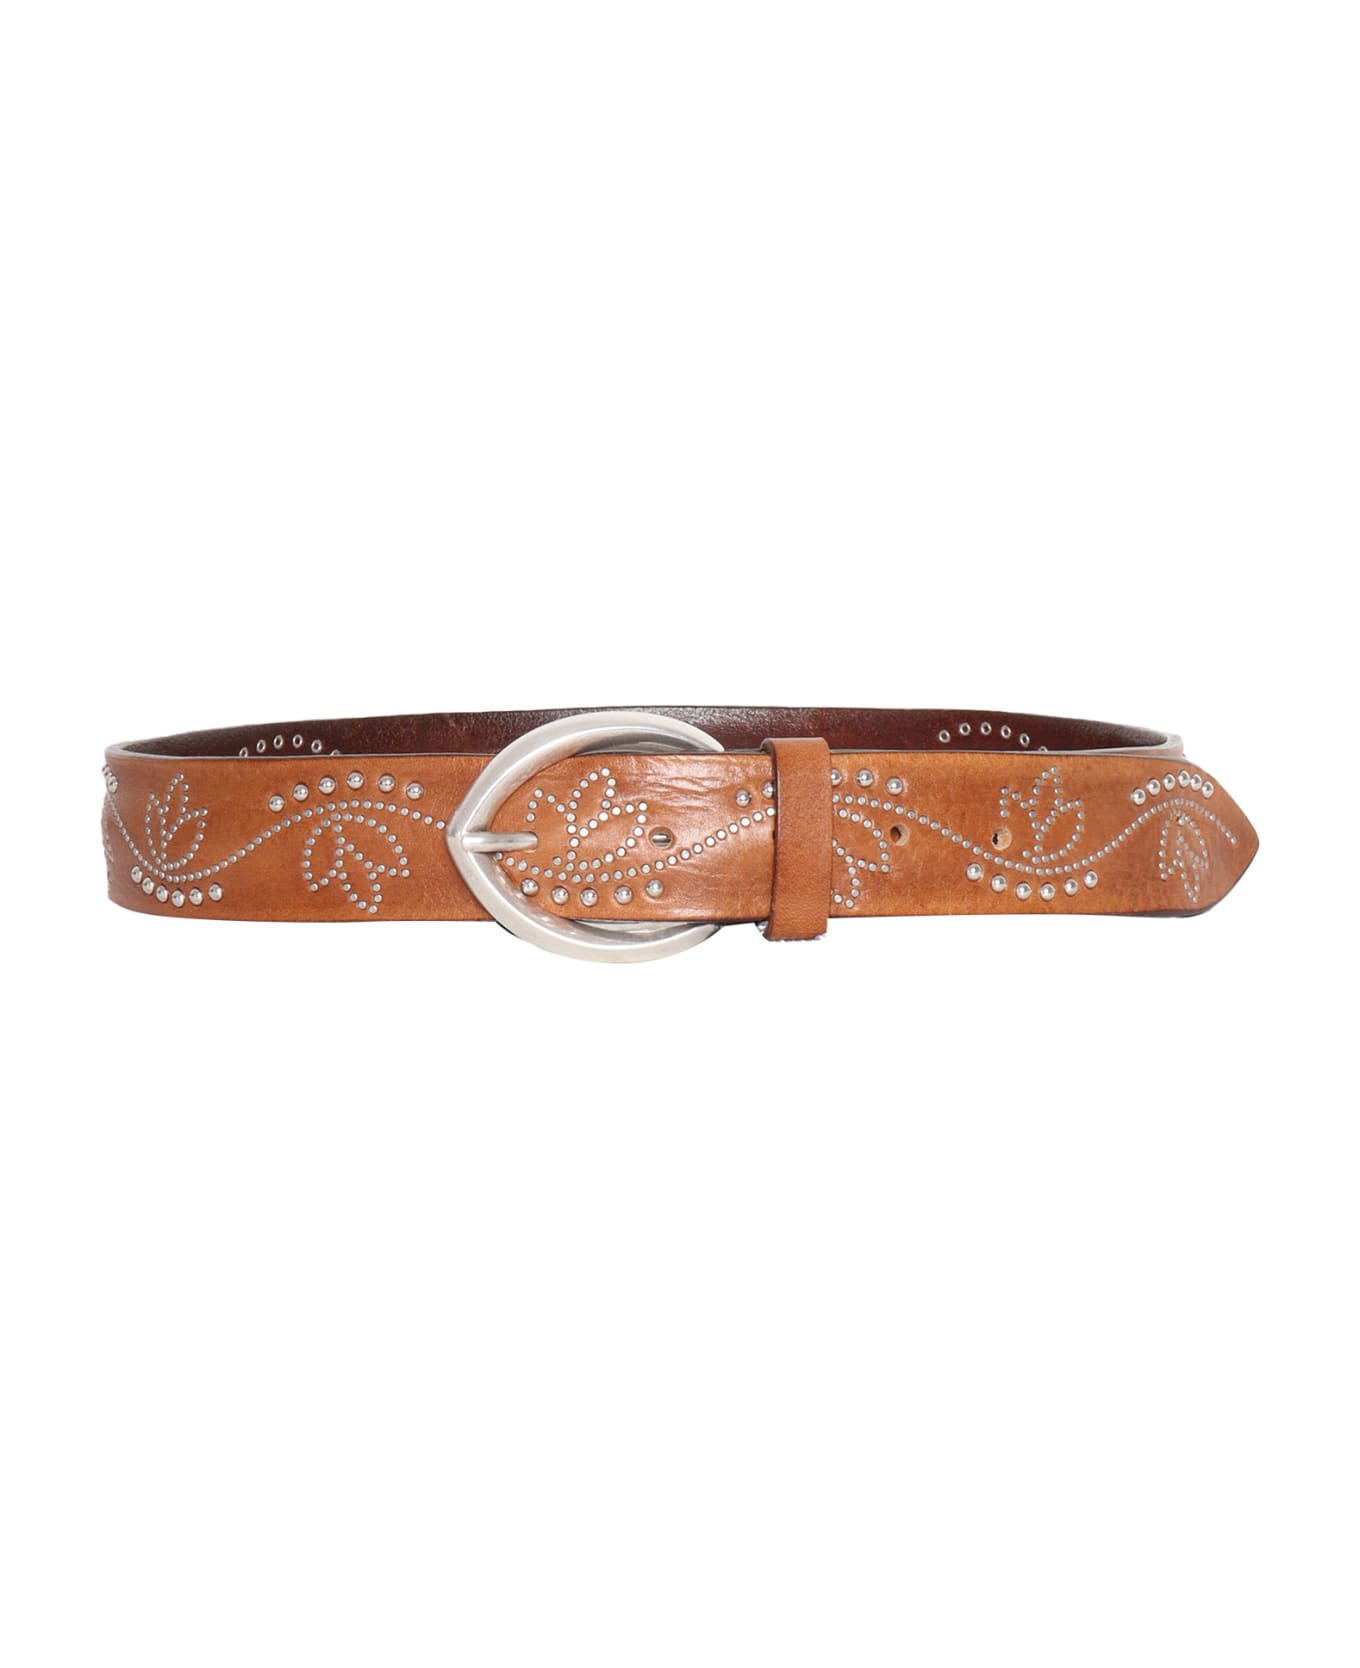 Orciani Leather Belt With Studs - BROWN ベルト